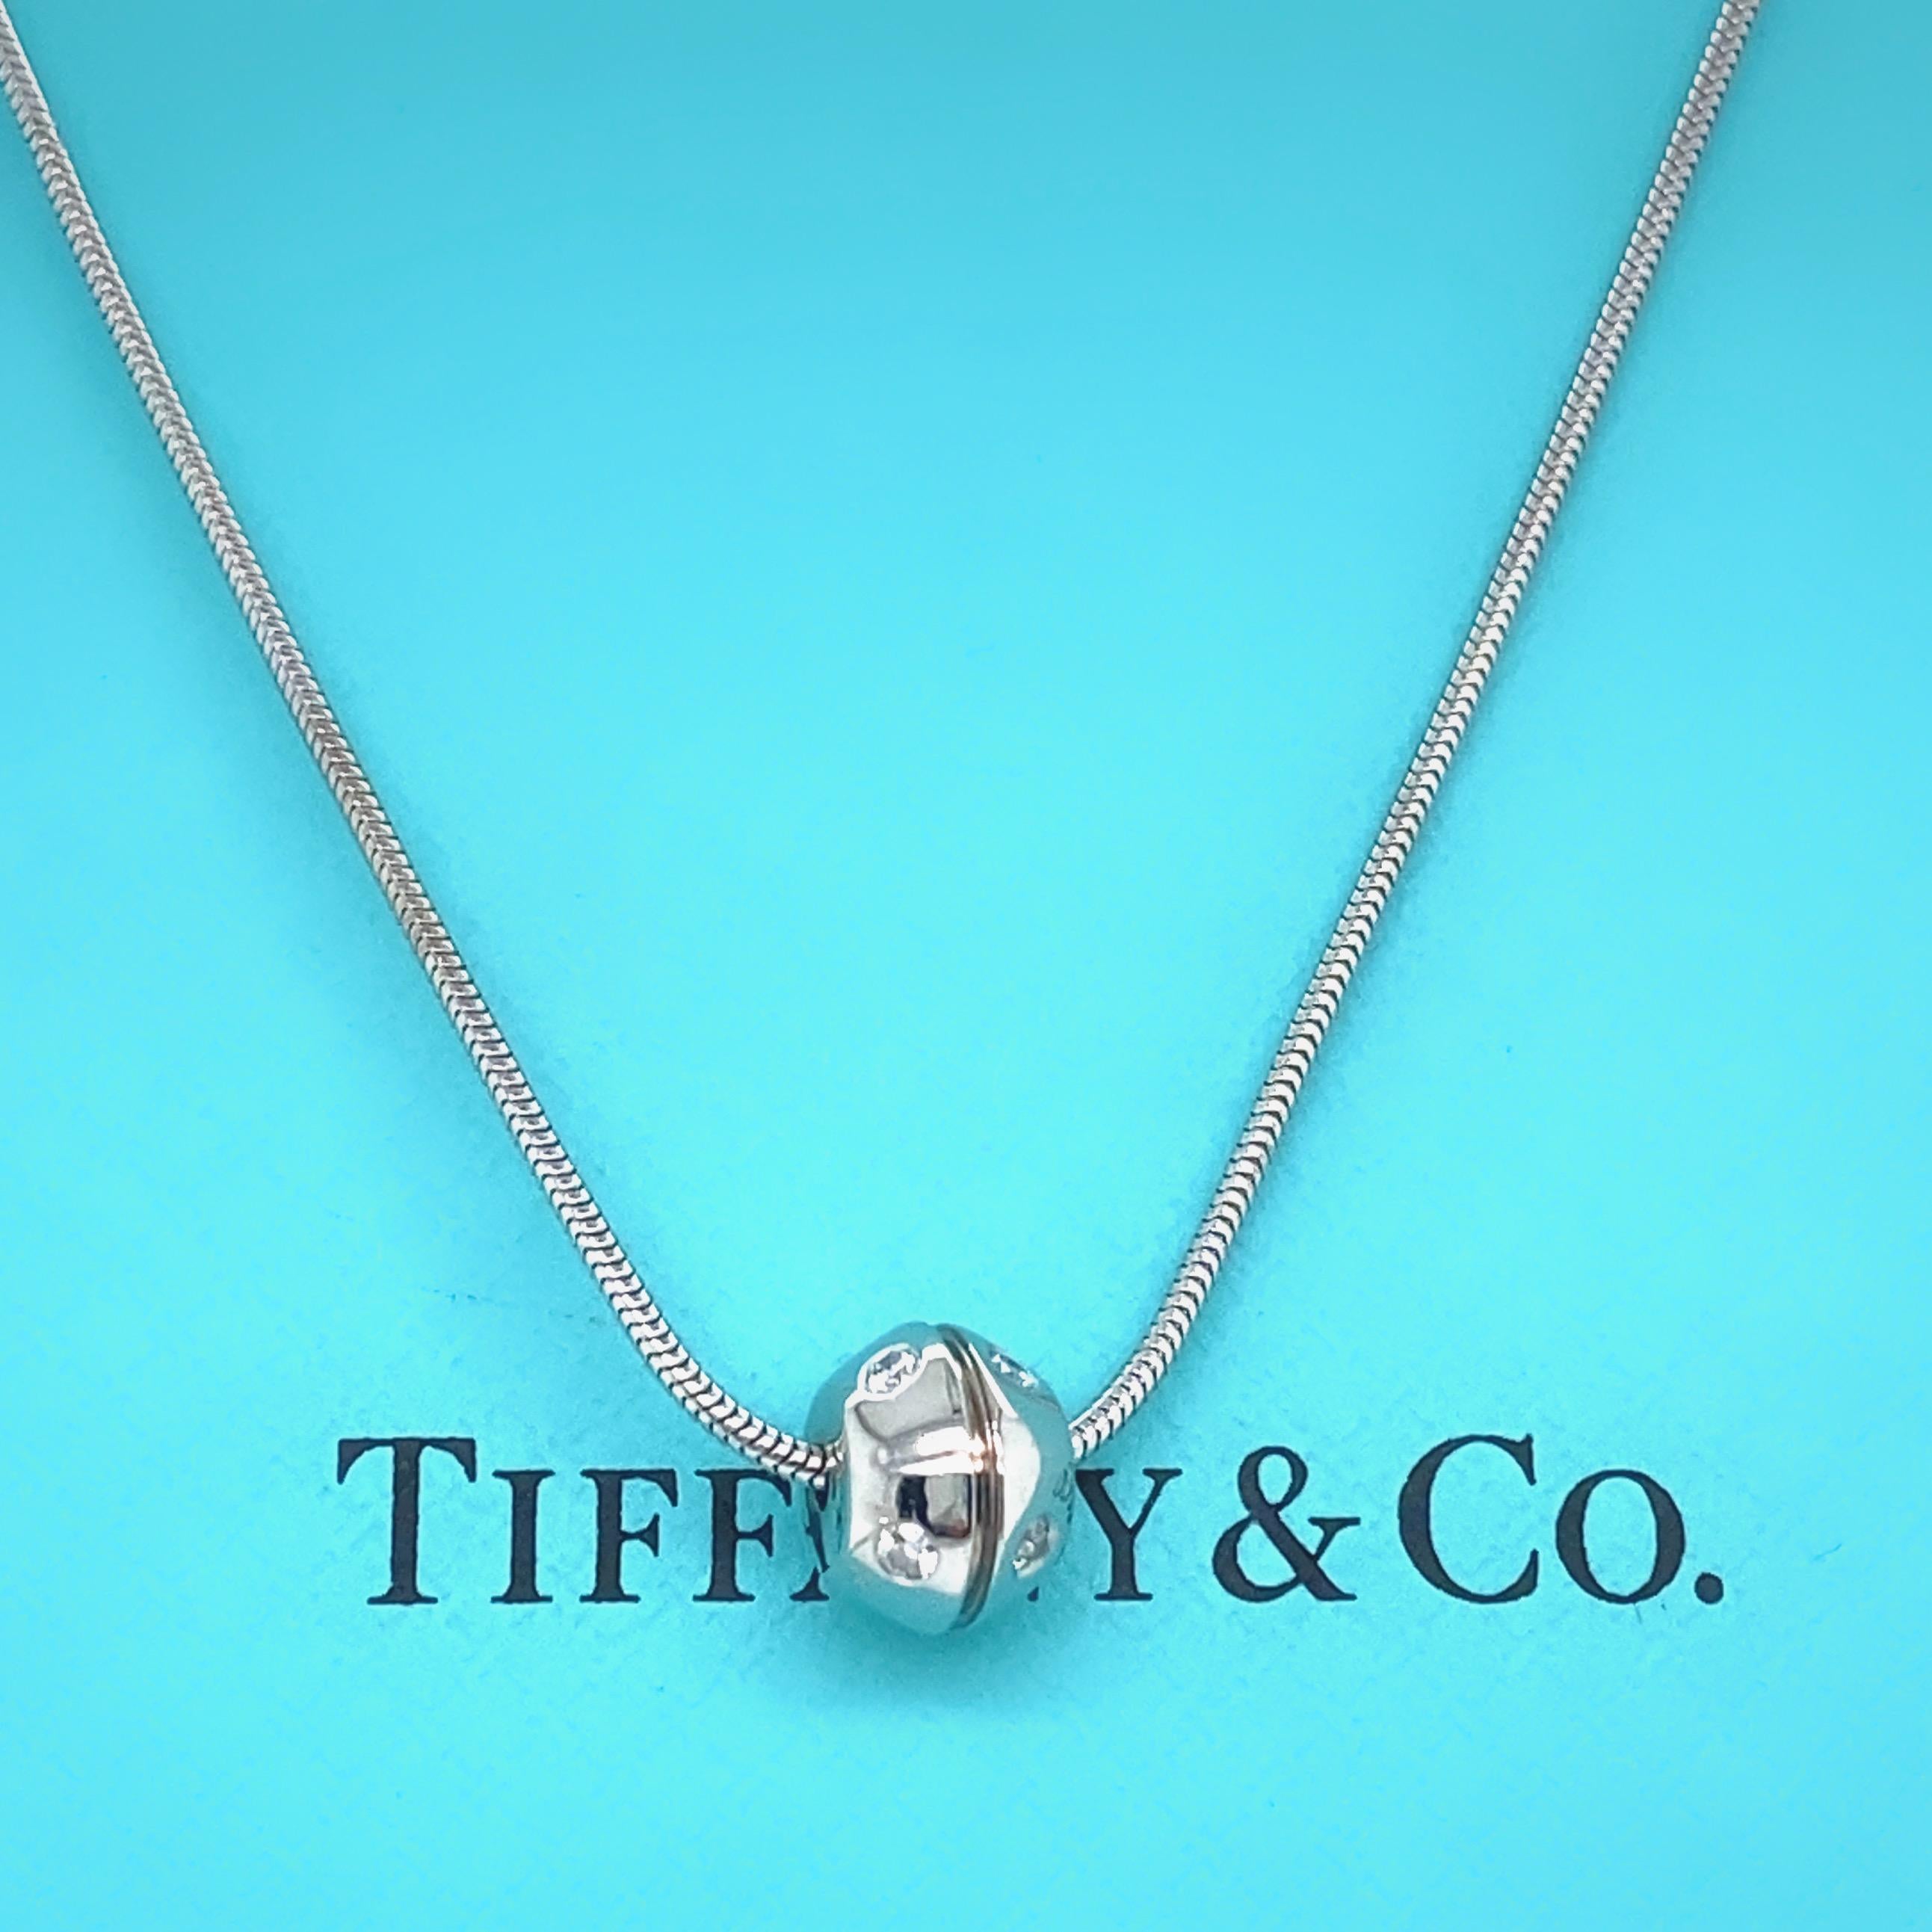 Tiffany & Co ETOILE Rotating Diamond Ball Pendant Necklace
Style:  Slide
Metal:  18kt White Gold
Size:  Small
Length:  16.5' inches
TCW:  0.12 tcw
Main Diamond:  8 Round Brilliant Diamonds 
Color & Clarity:  F, VVS
Weight:    6.1 grams
Hallmark: 